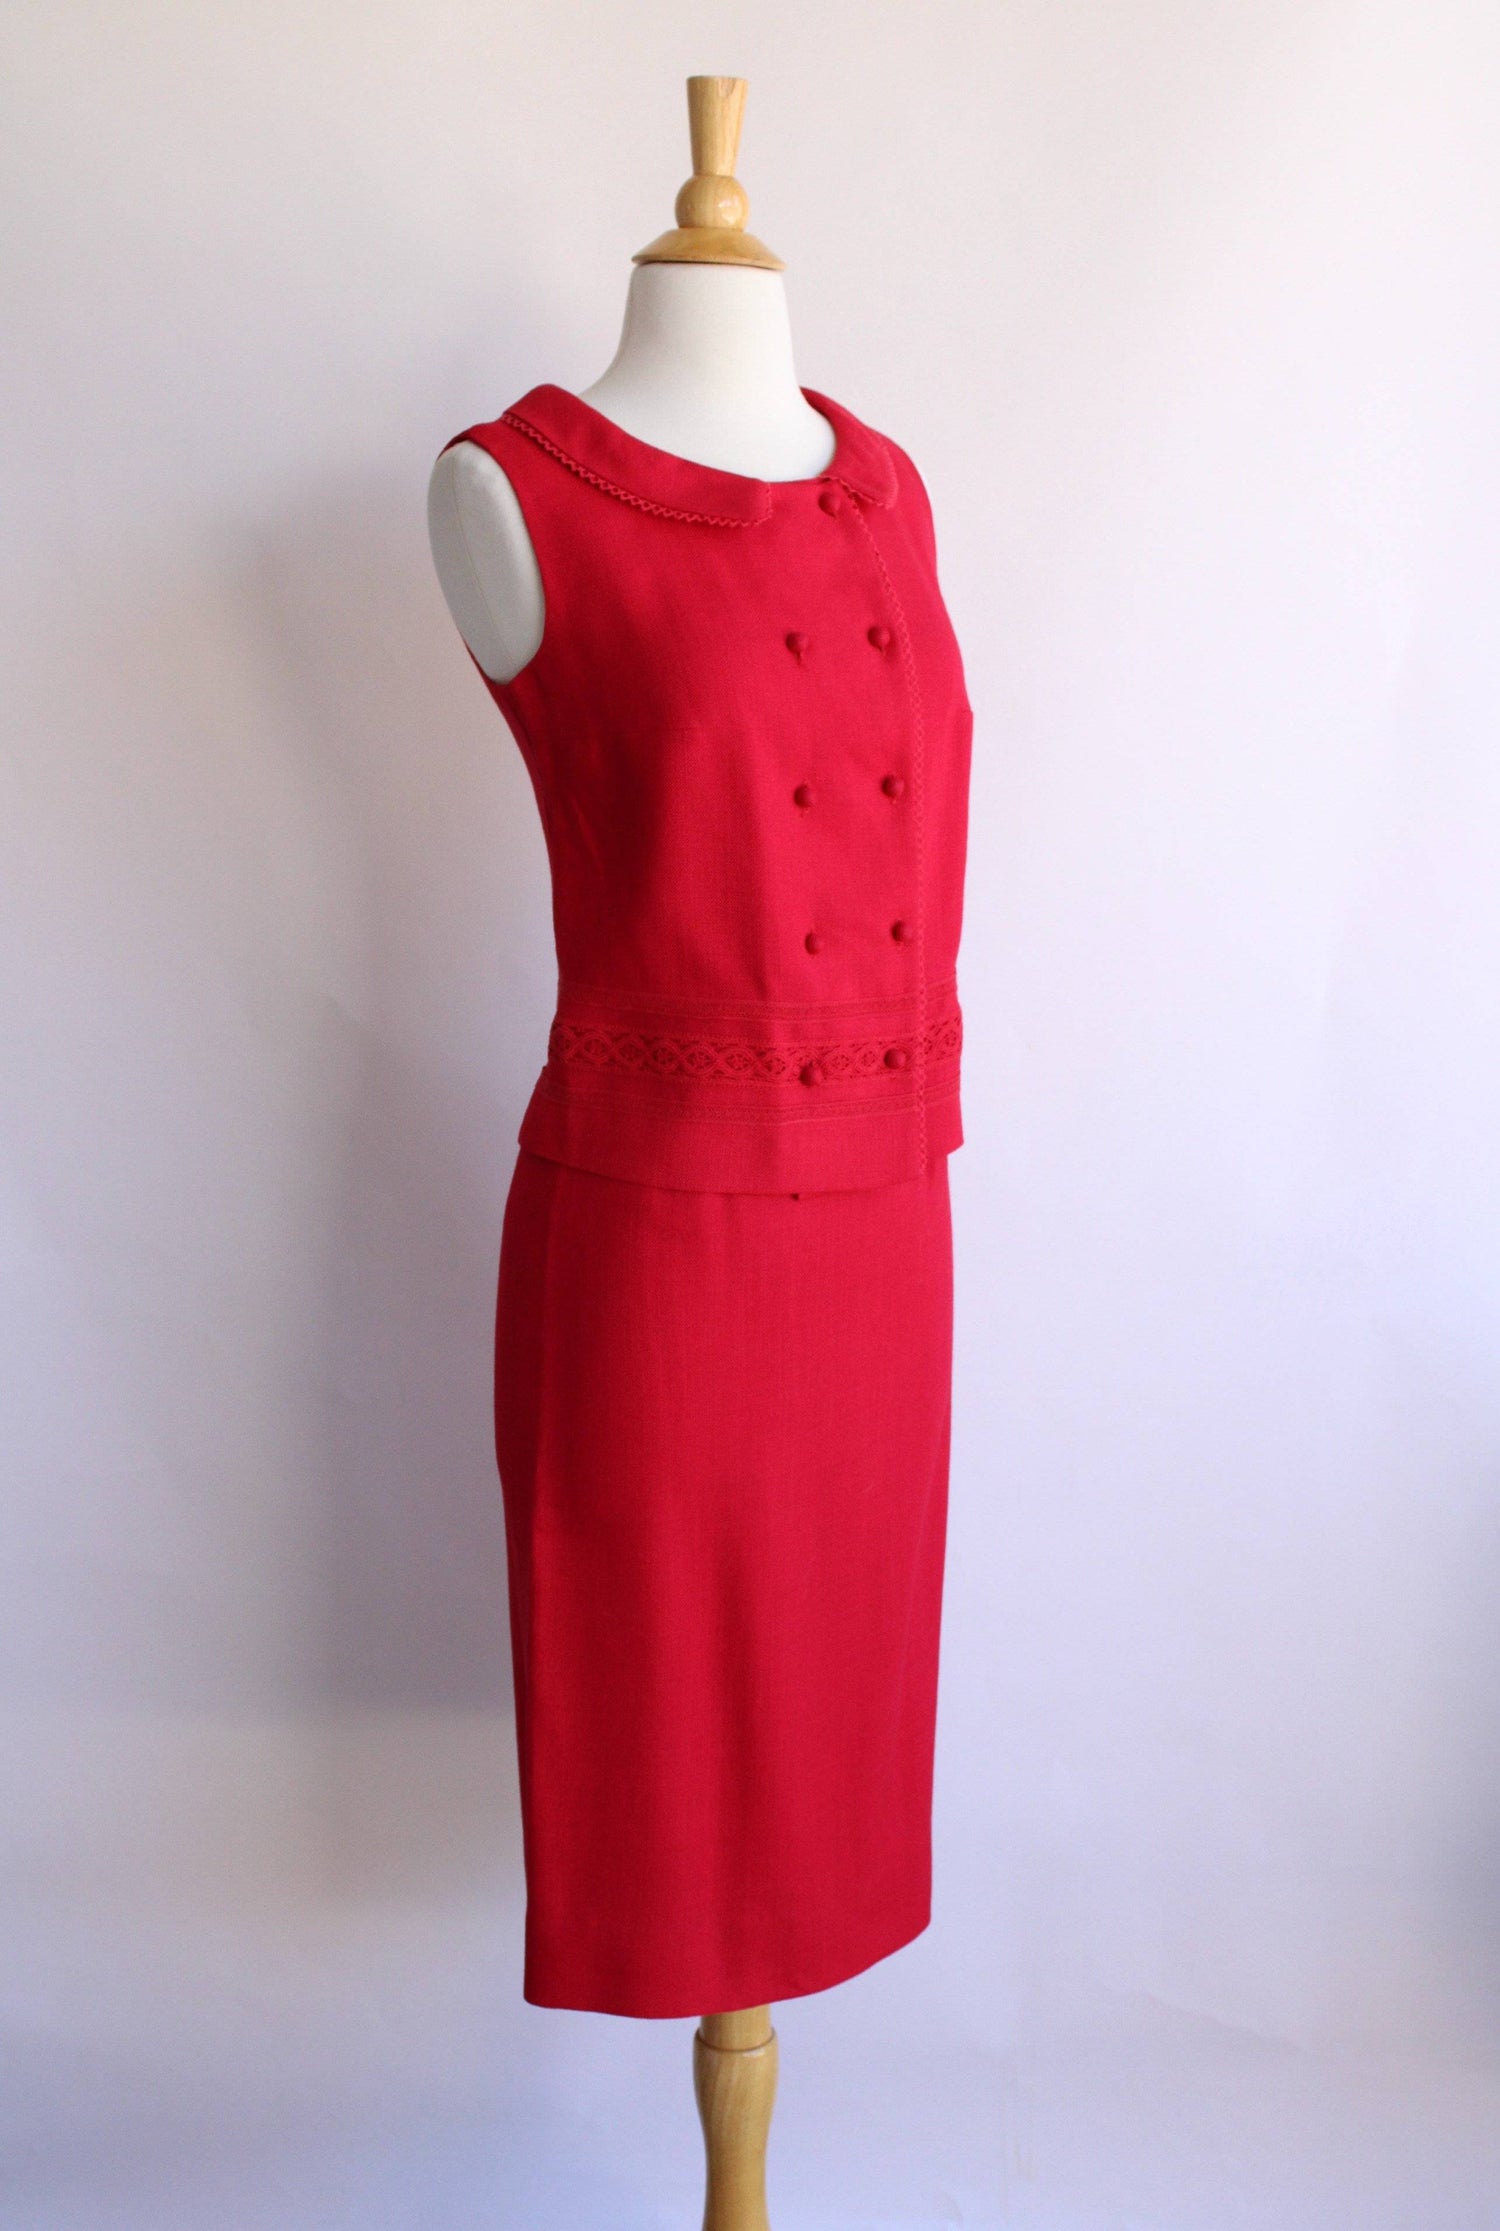 Vintage 1960s Two Piece Outfit Separates, Campus Casuals-Toadstool Farm Vintage-barkcloth,boxy top,campus casuals,pencil skirt,red,Separates,seperates,suit,two piece,Vintage,Vintage Clothing